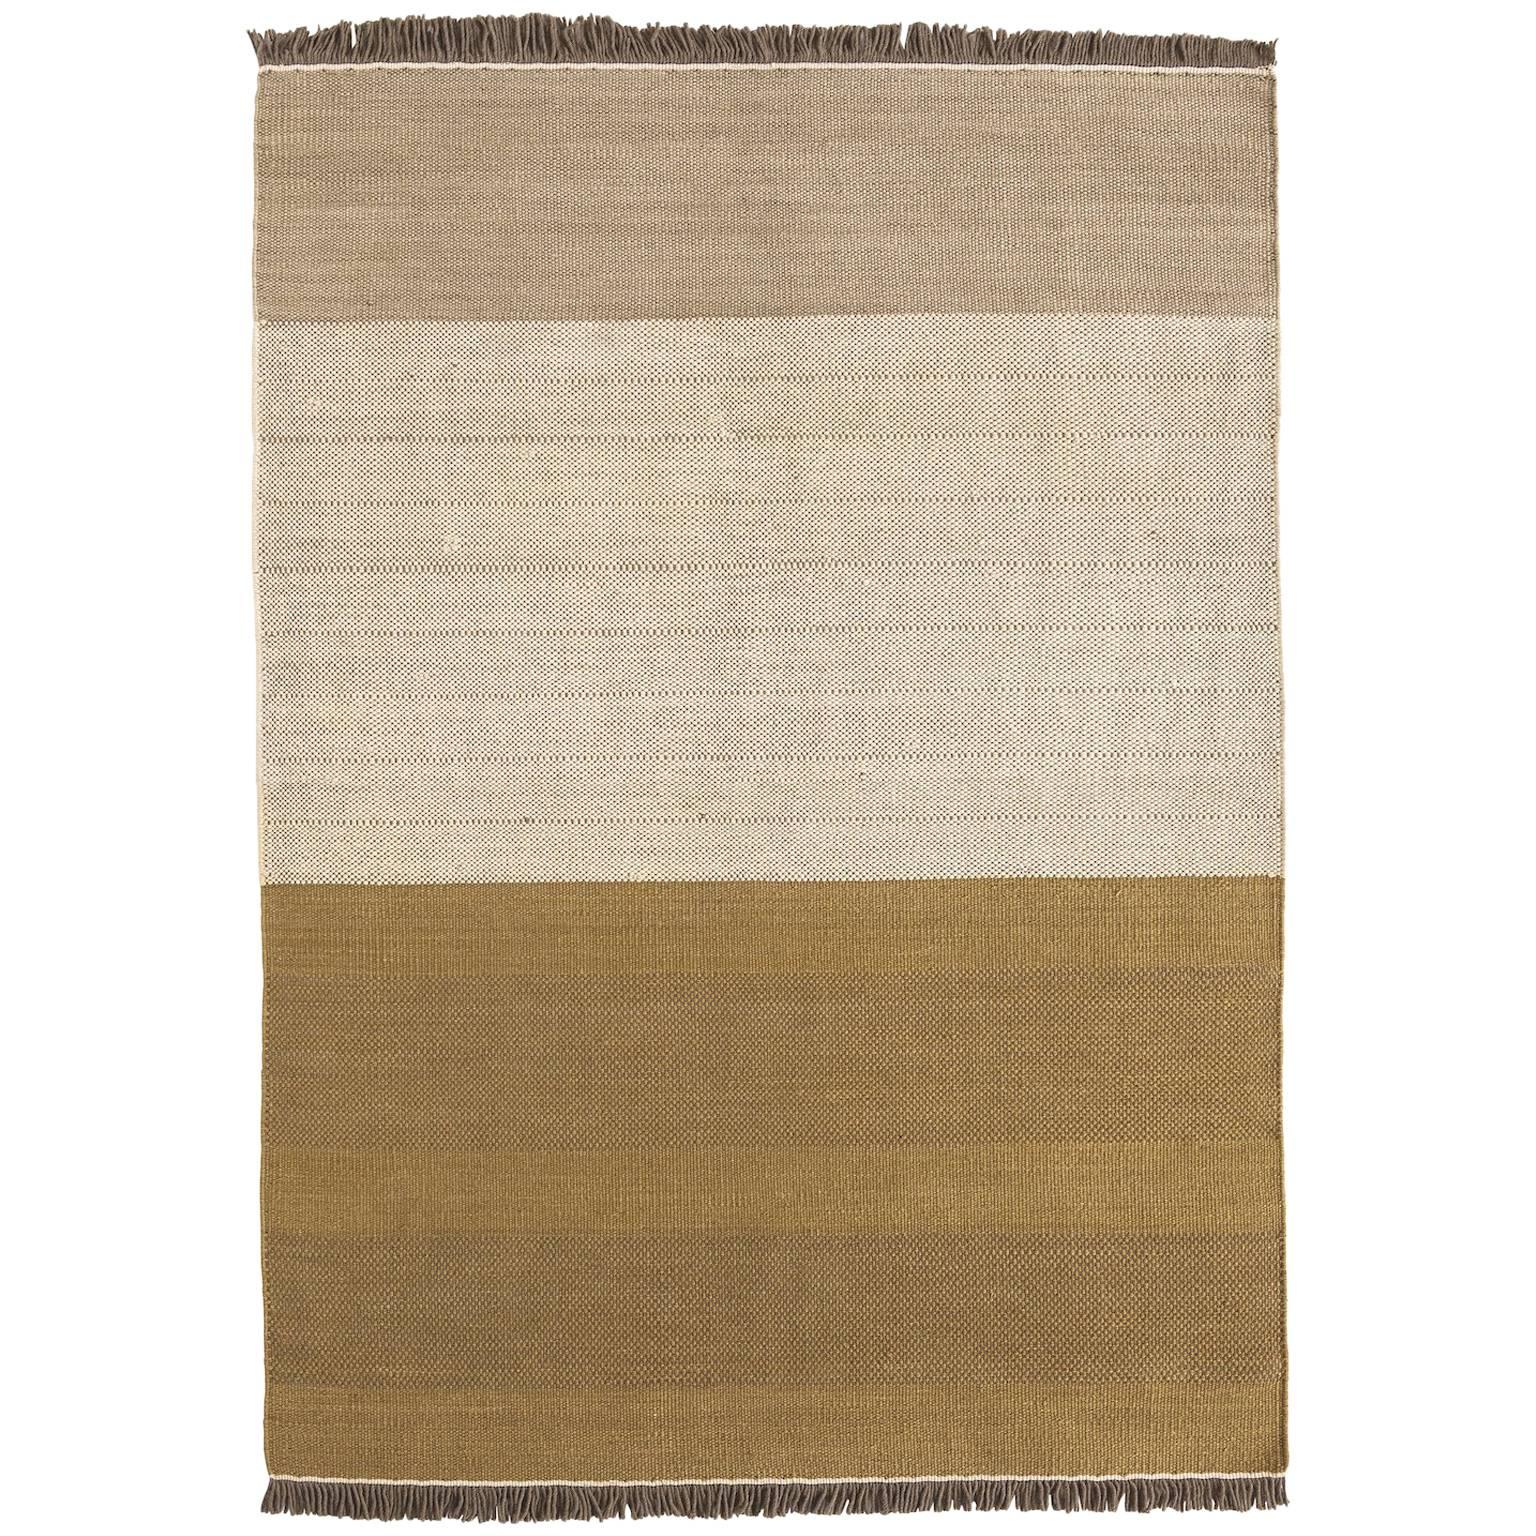 Hand-Loomed Tres Stripes Rug in Ochre by Nani Marquina & Elisa Padro, Large For Sale